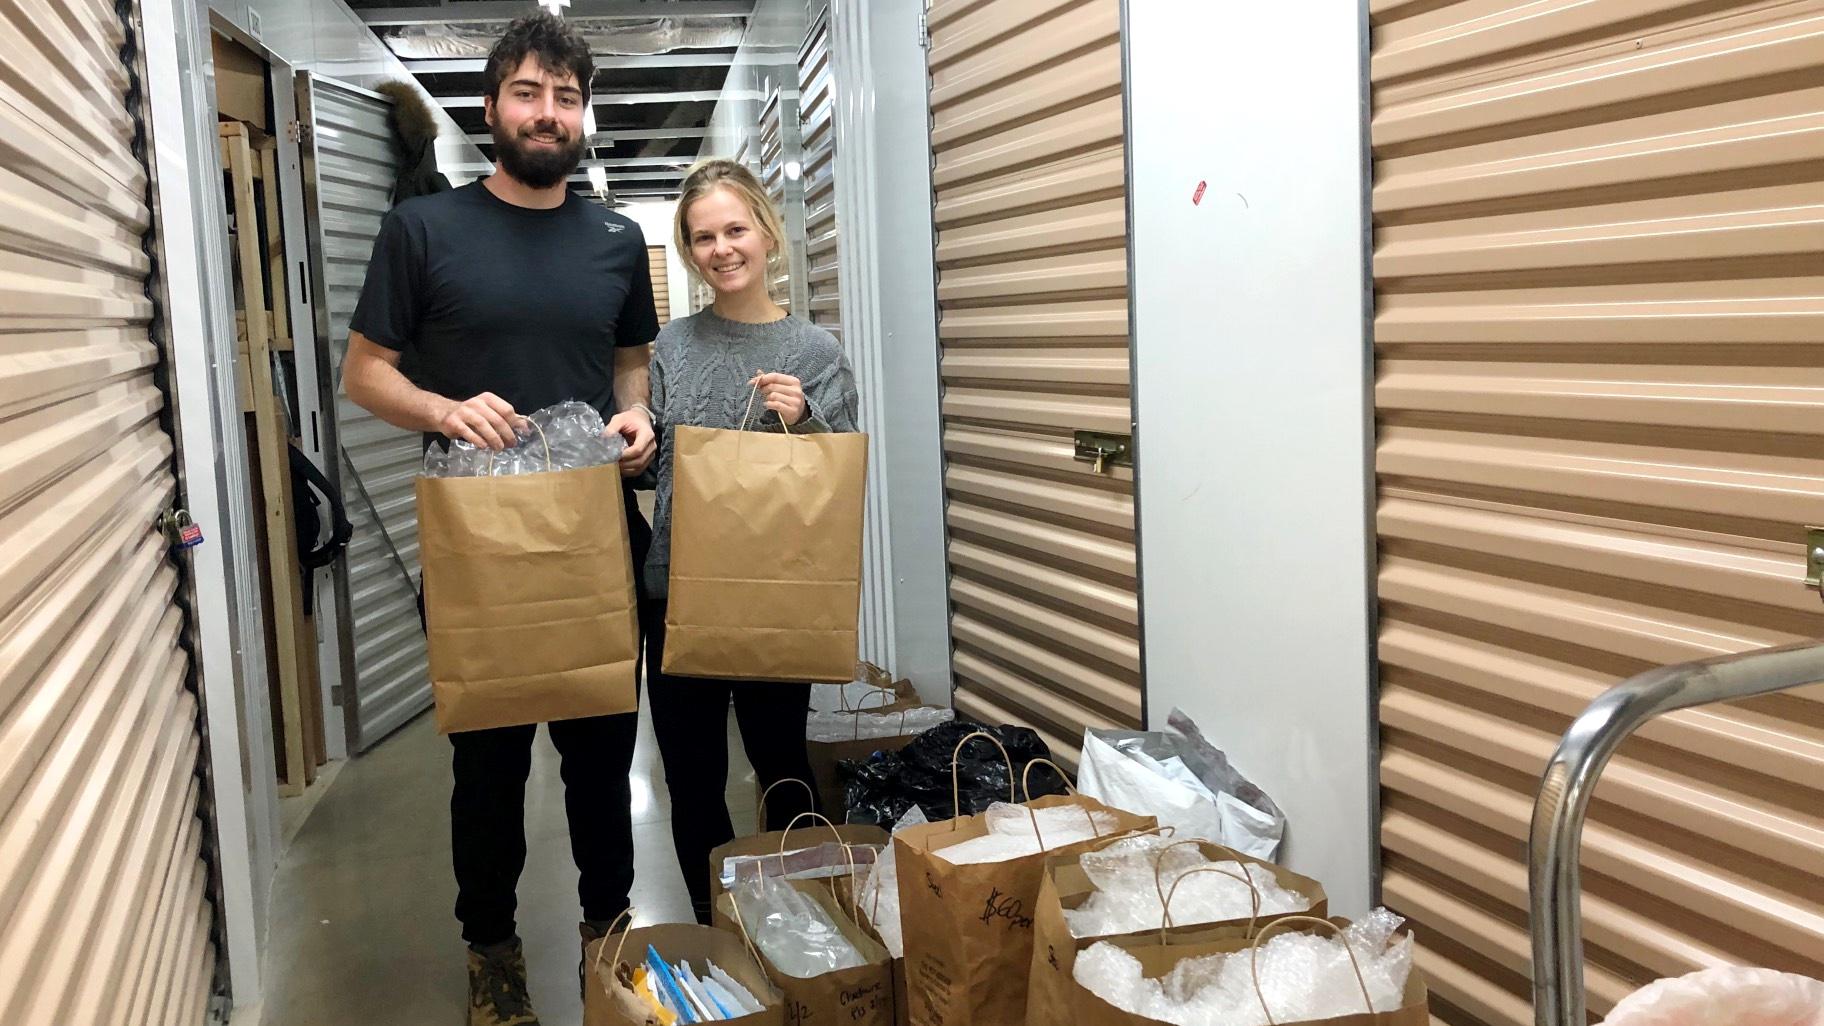 EcoShip's Peter Proctor and Alexsandra Plewa, prepping an order of recycled shipping materials for a customer. (Patty Wetli / WTTW News) 